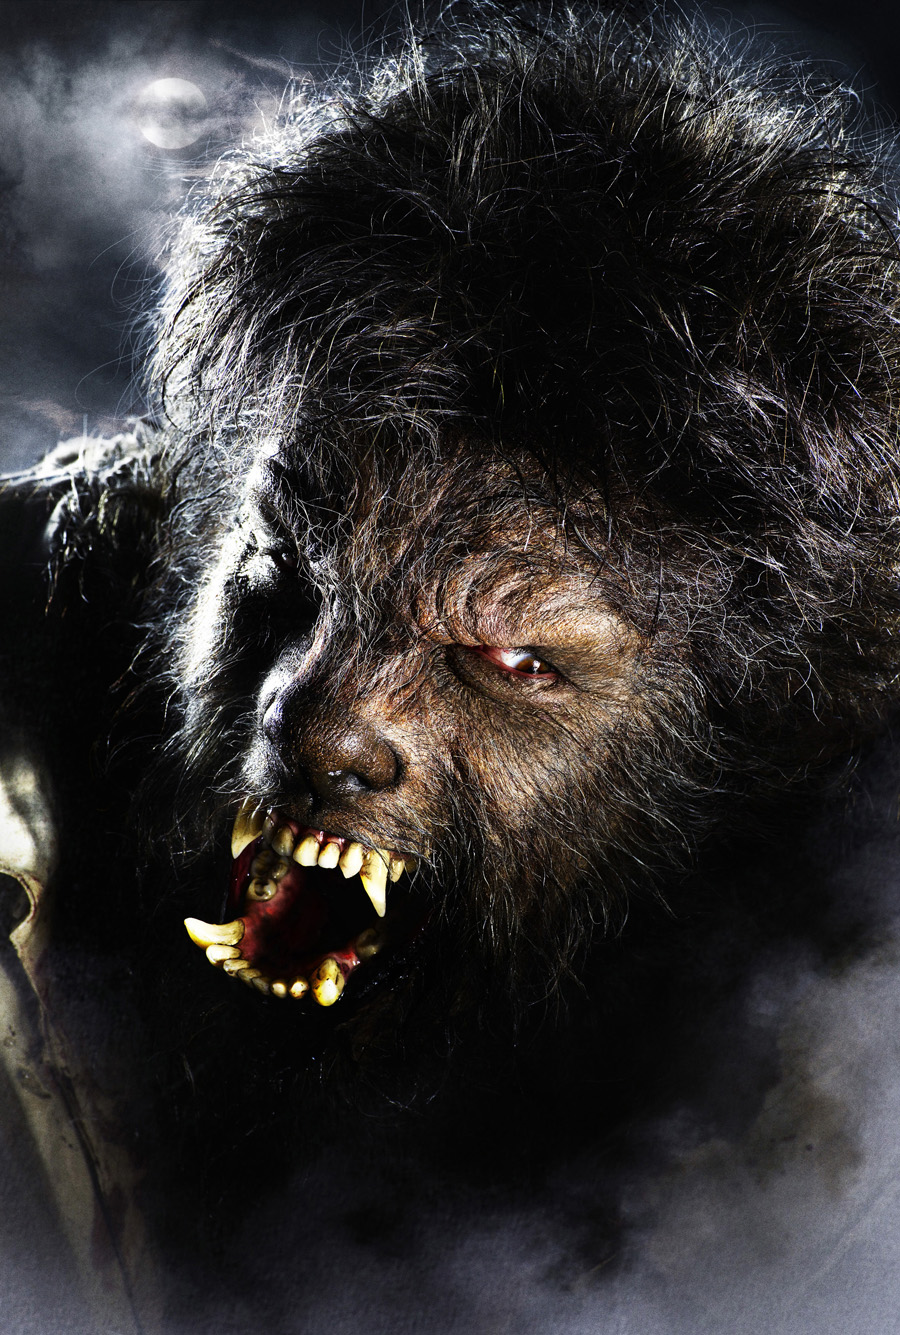 The Wolfman: Returning Horror to its Iconic Origin